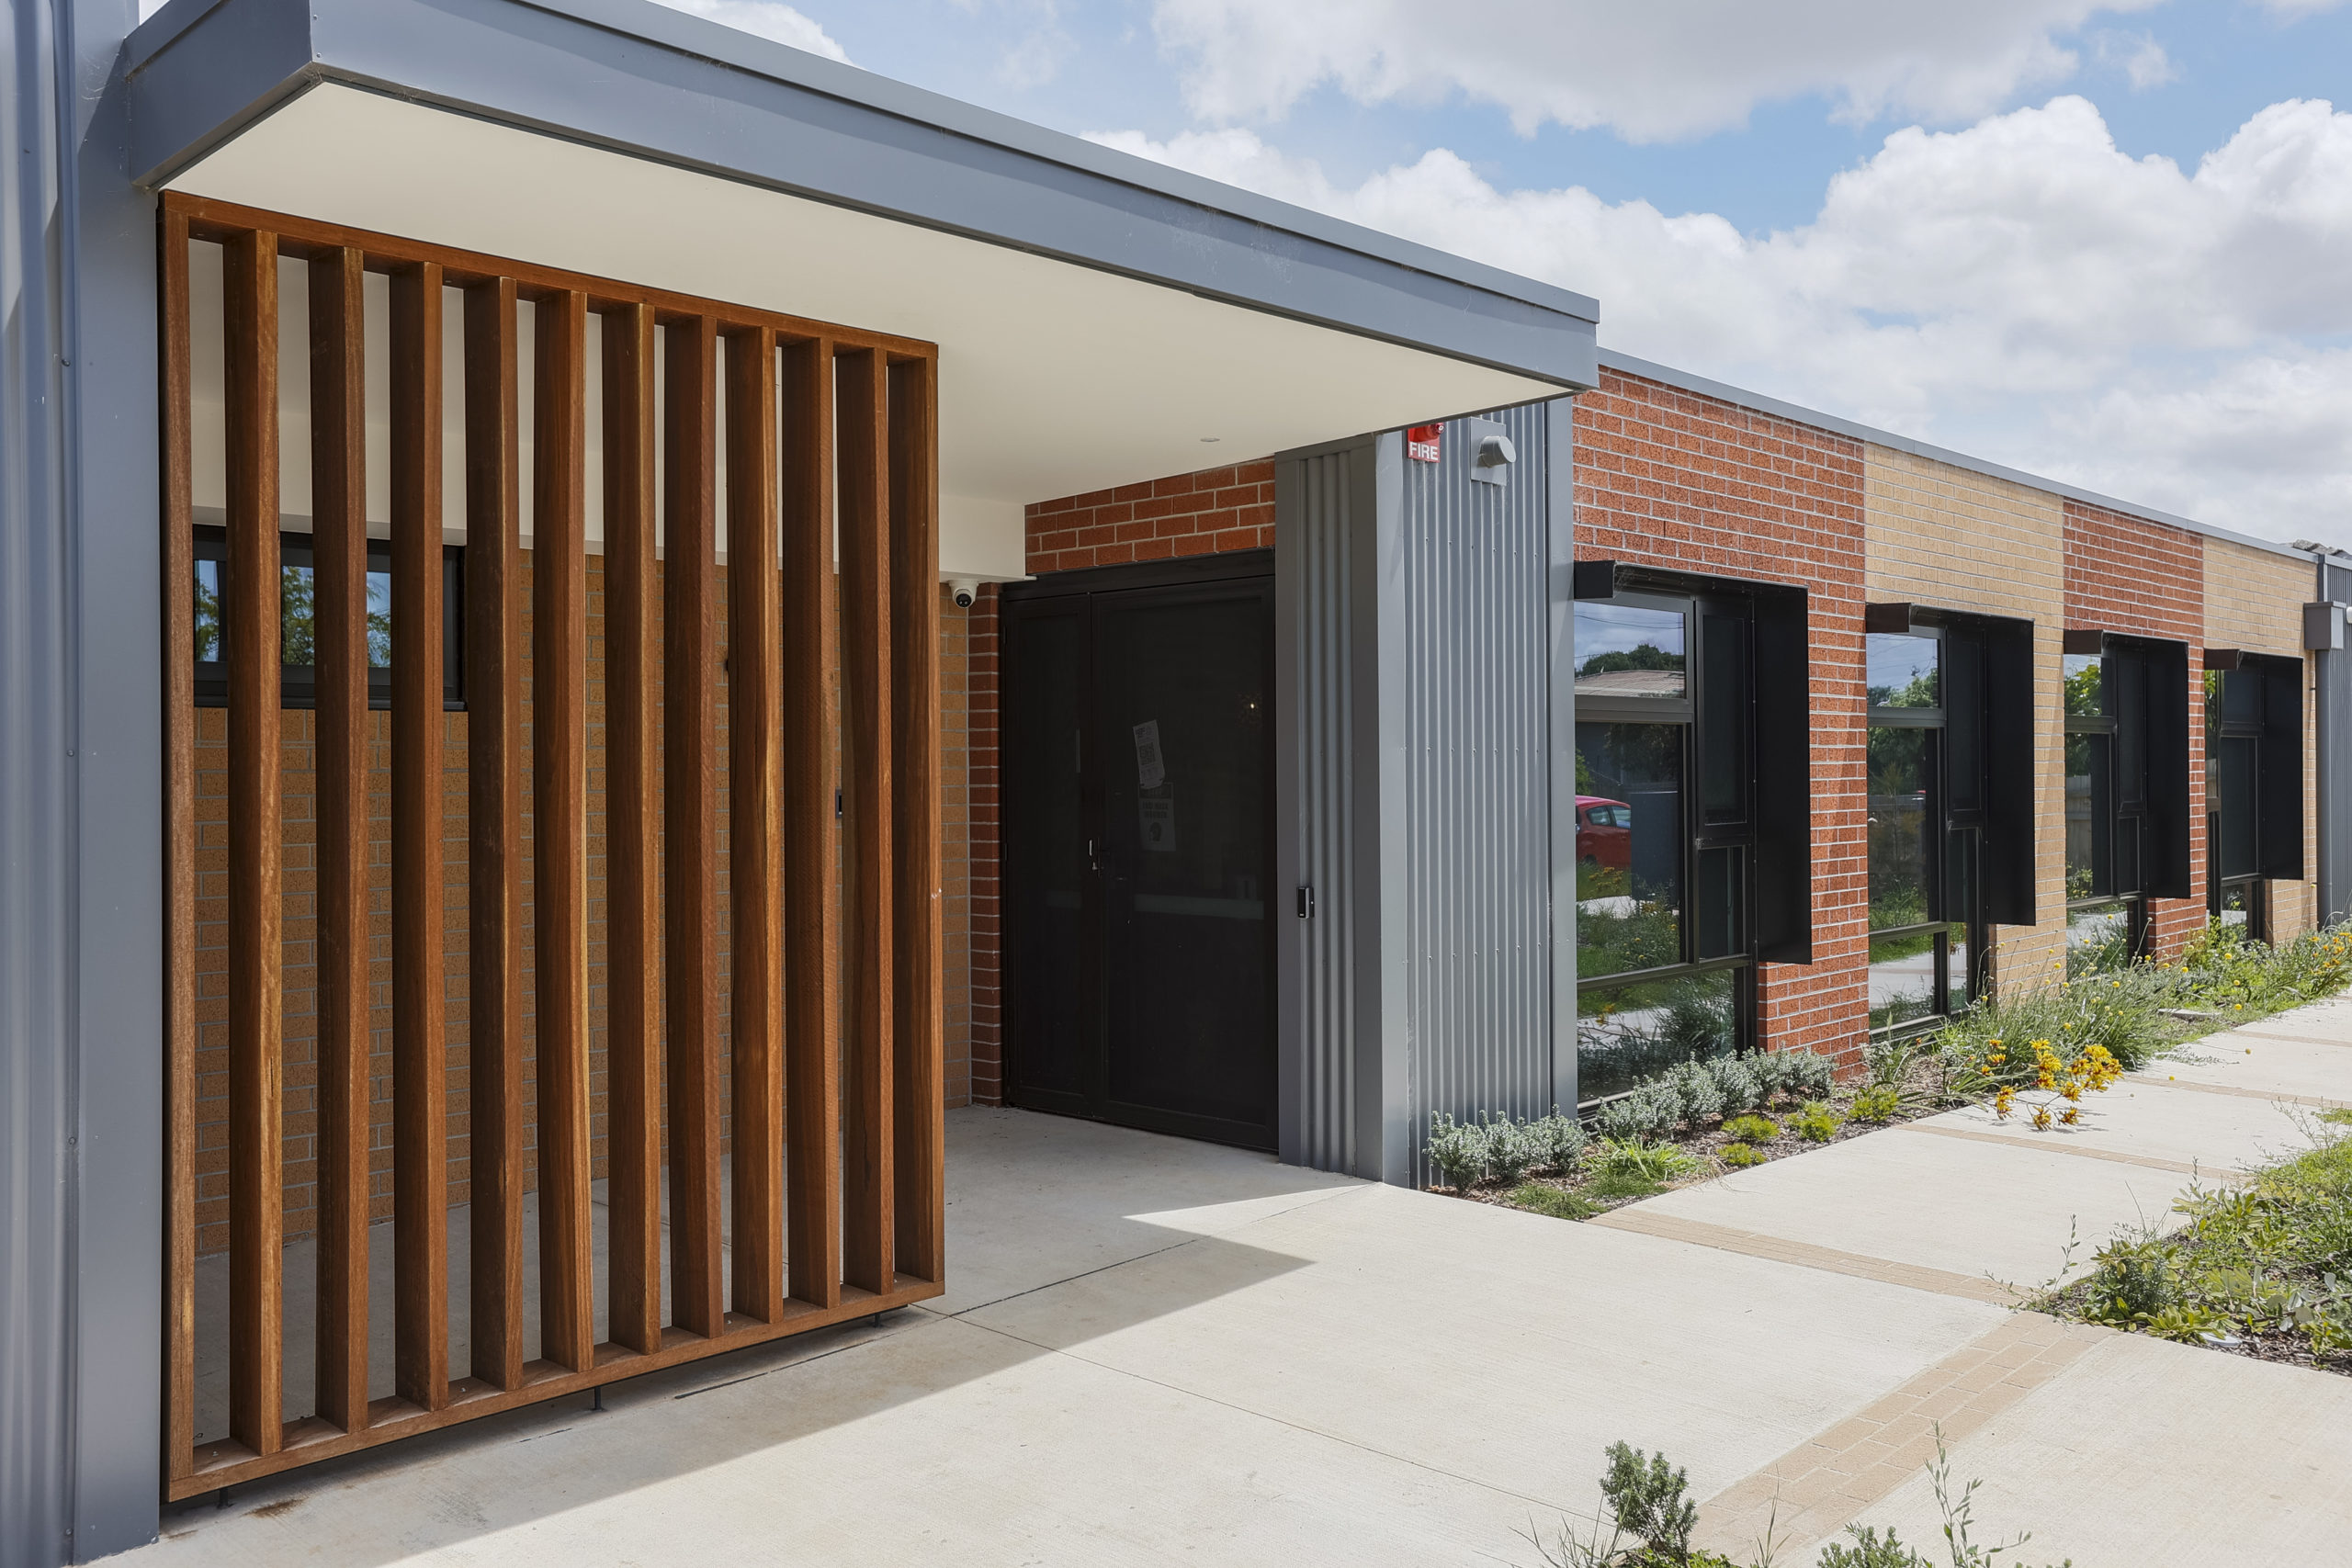 The Hacer Group built a future for young Australians in Werribee, Melbourne